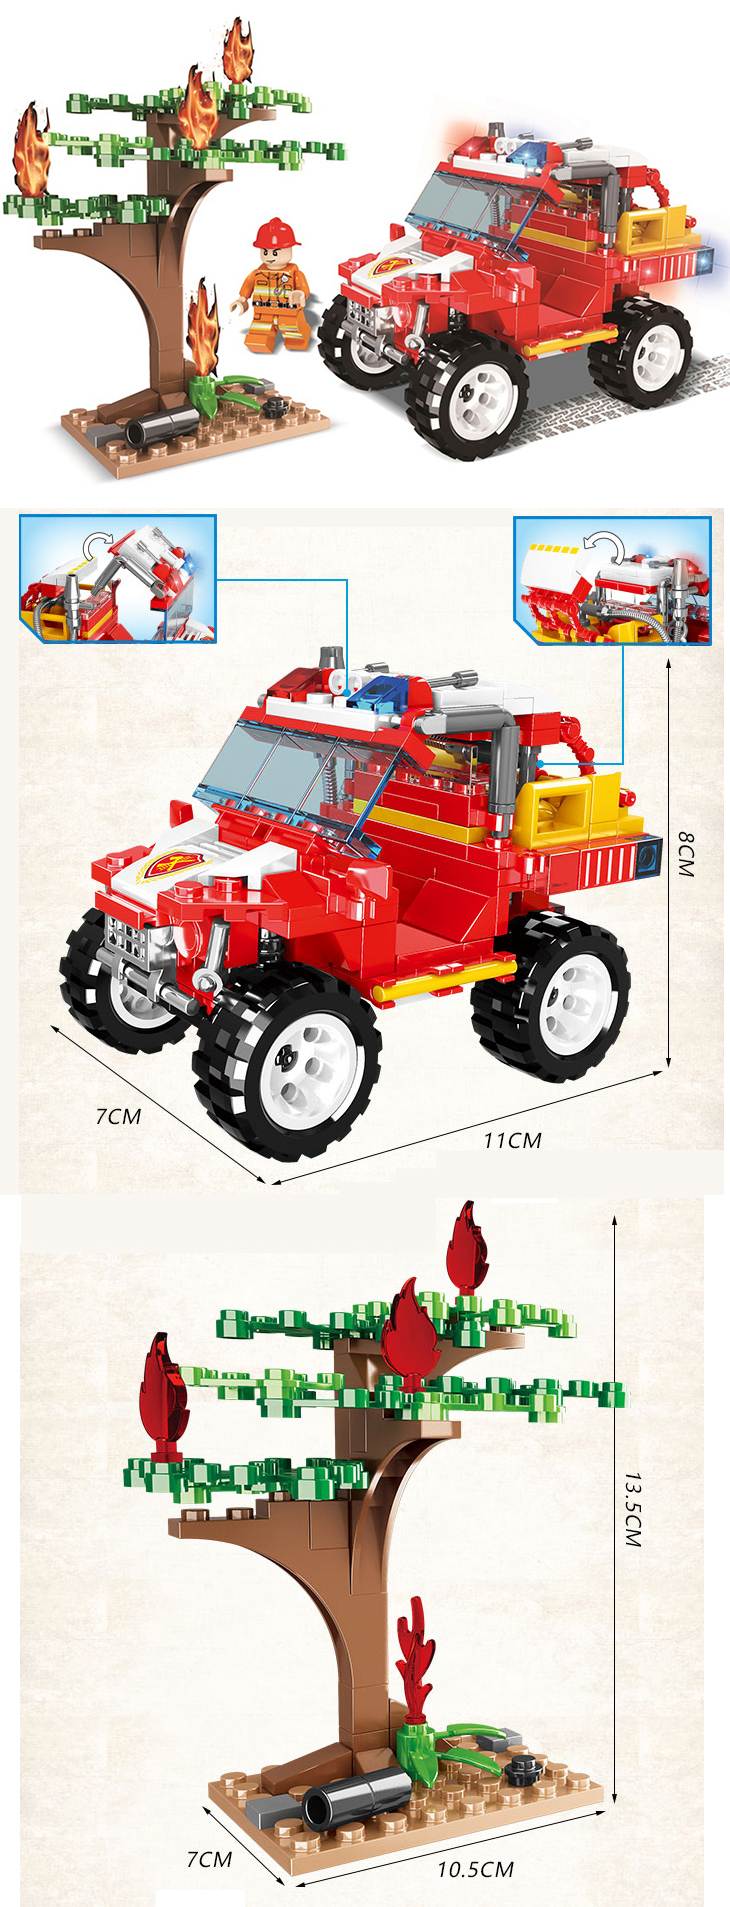 WOMA TOYS Compatible major brands fire truck Small Building Blocks bricks toy city fireman figures for Kids Scene Set